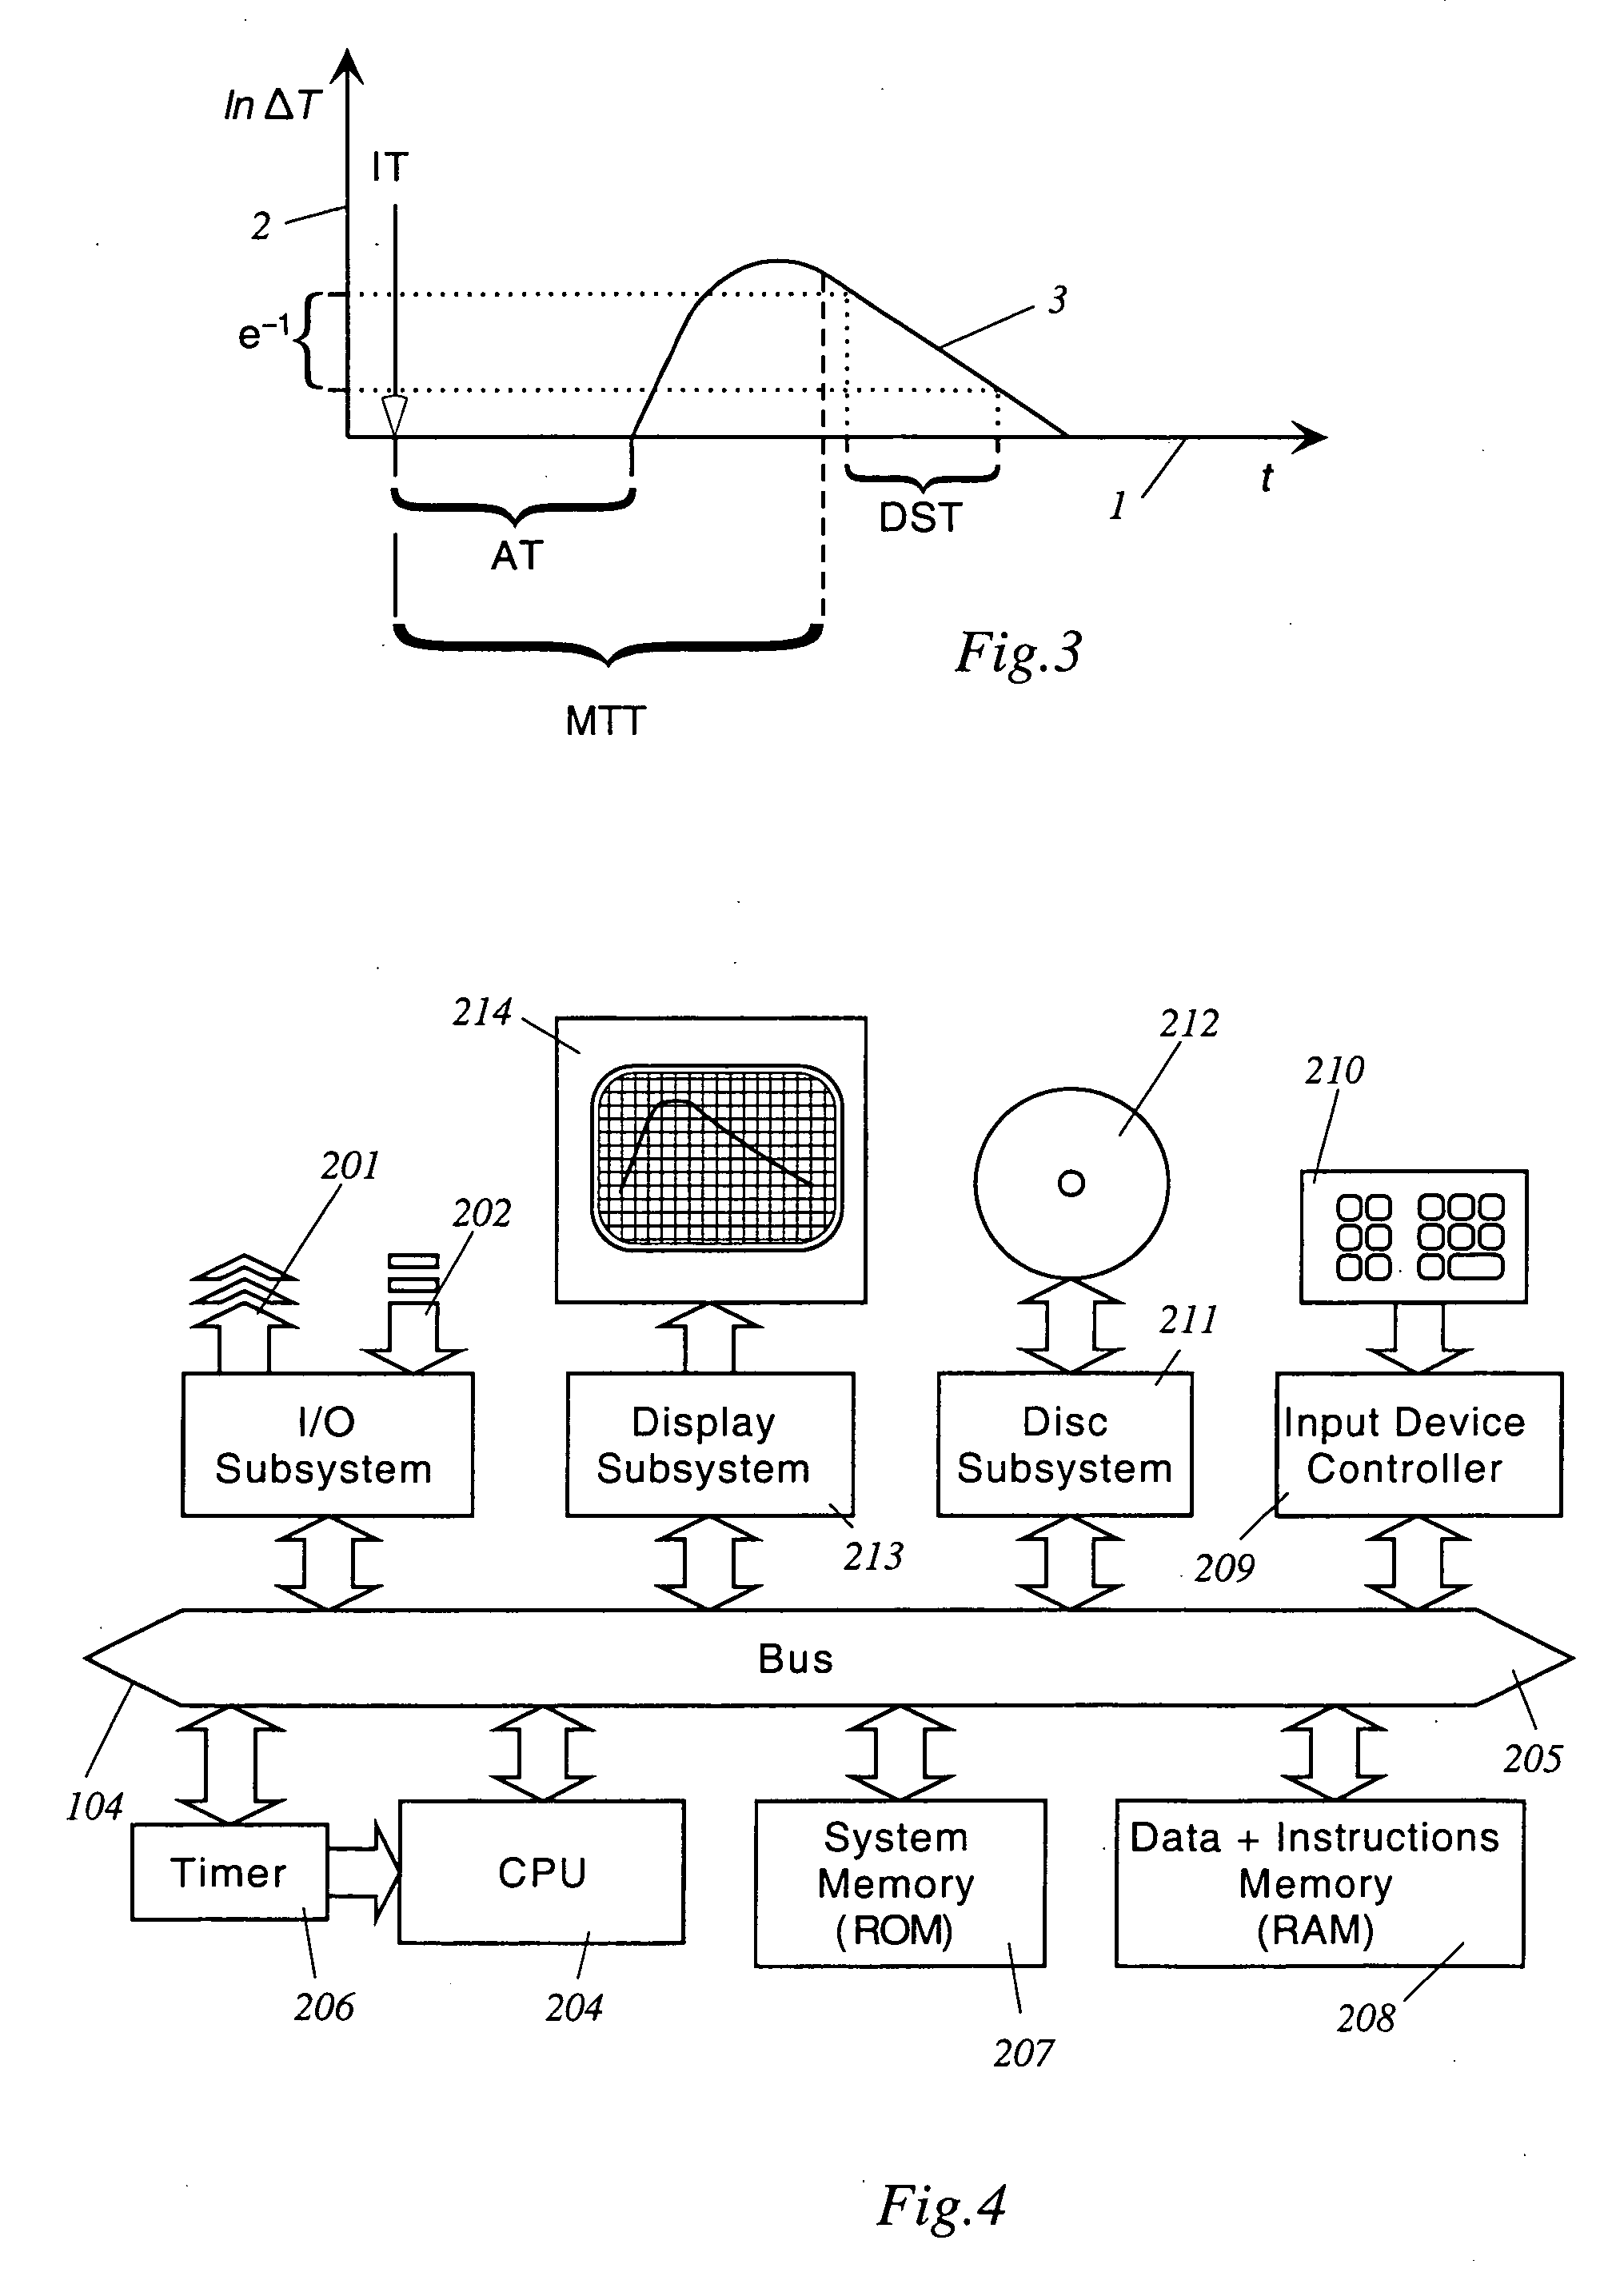 Apparatus, computer system and computer program for determining intrathoracic blood volume and other cardio-vascular parameters